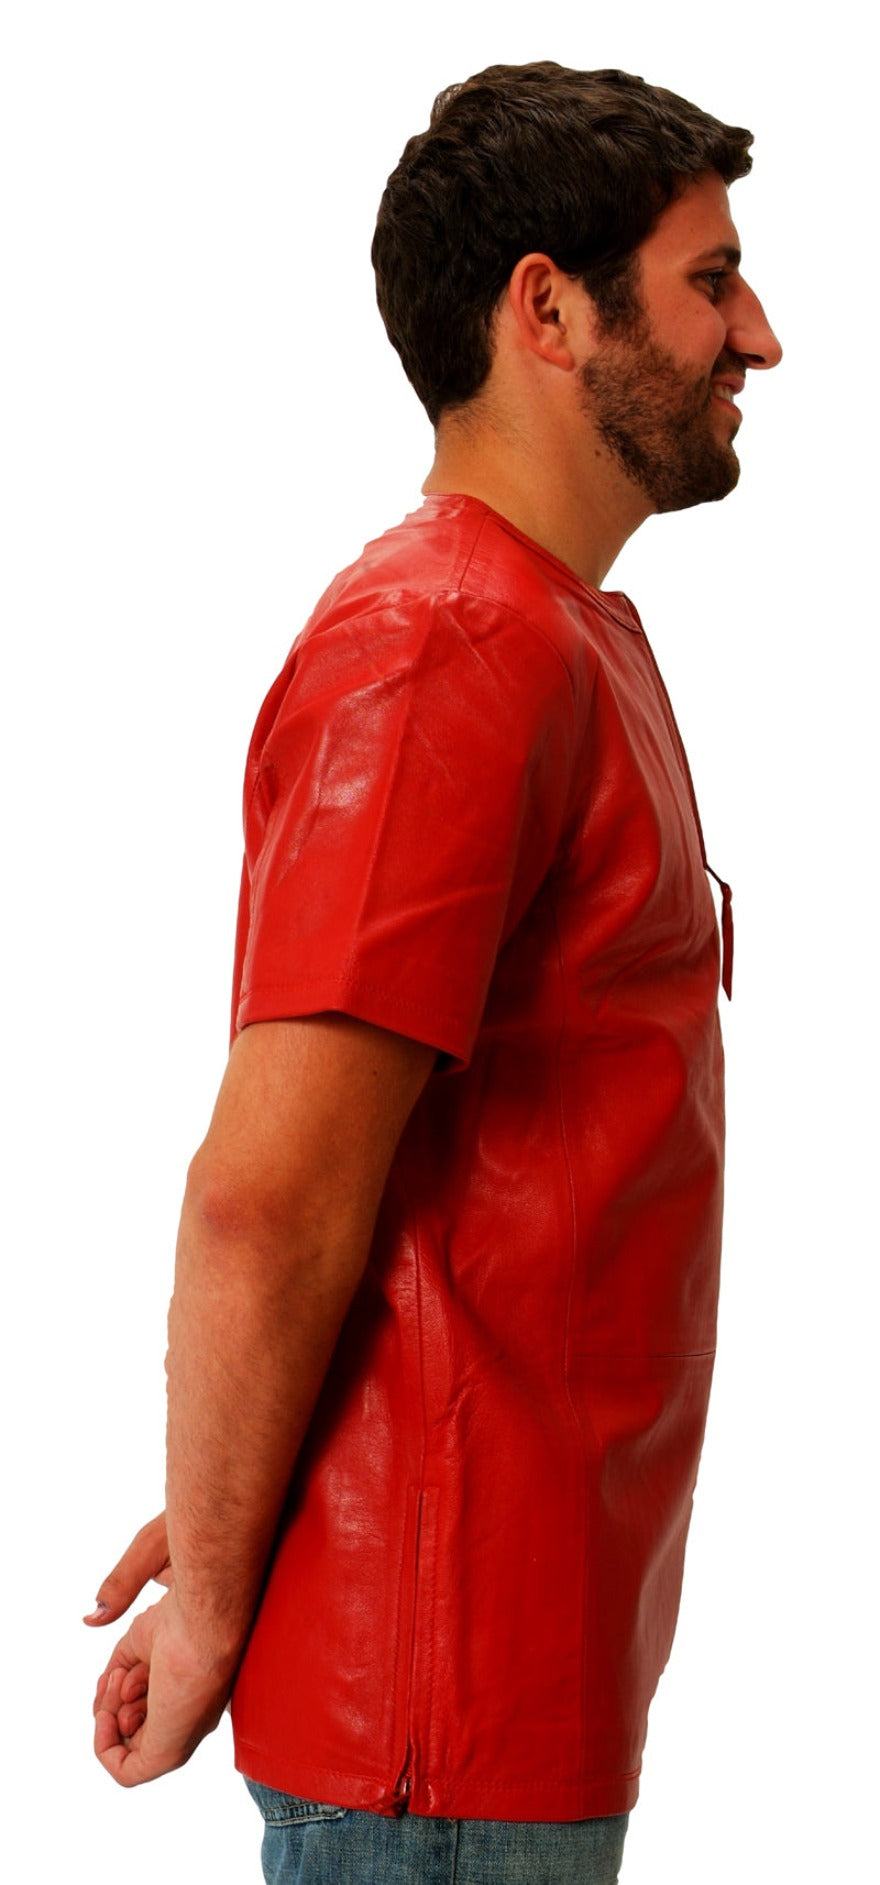 Picture of model wearing our red leather t shirt, side view.